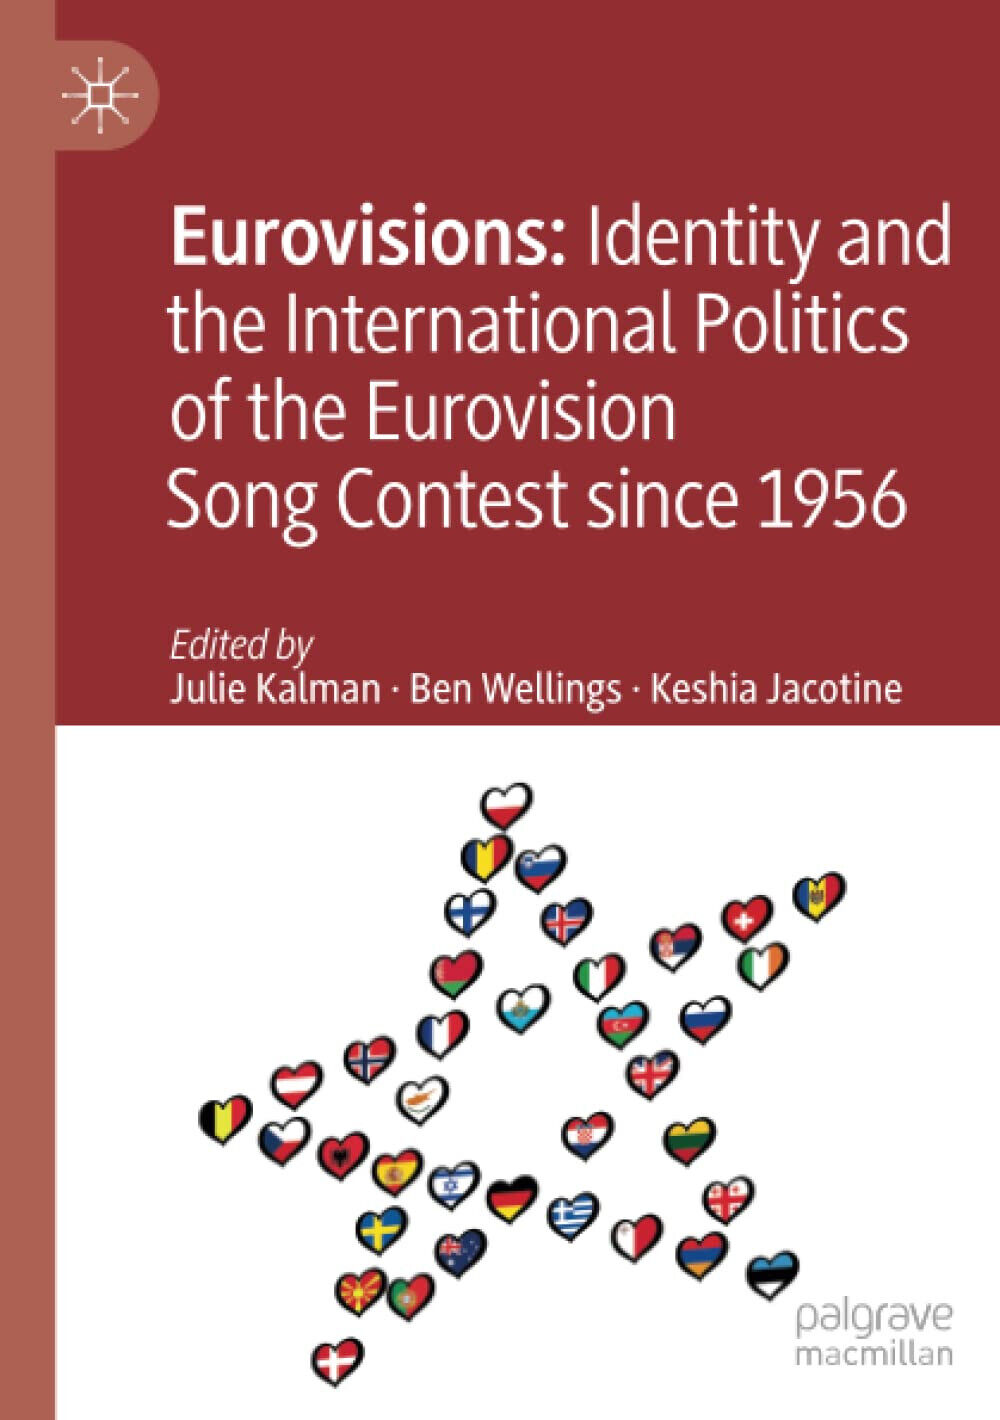 Eurovisions: Identity and the International Politics of the Eurovision Song libro usato